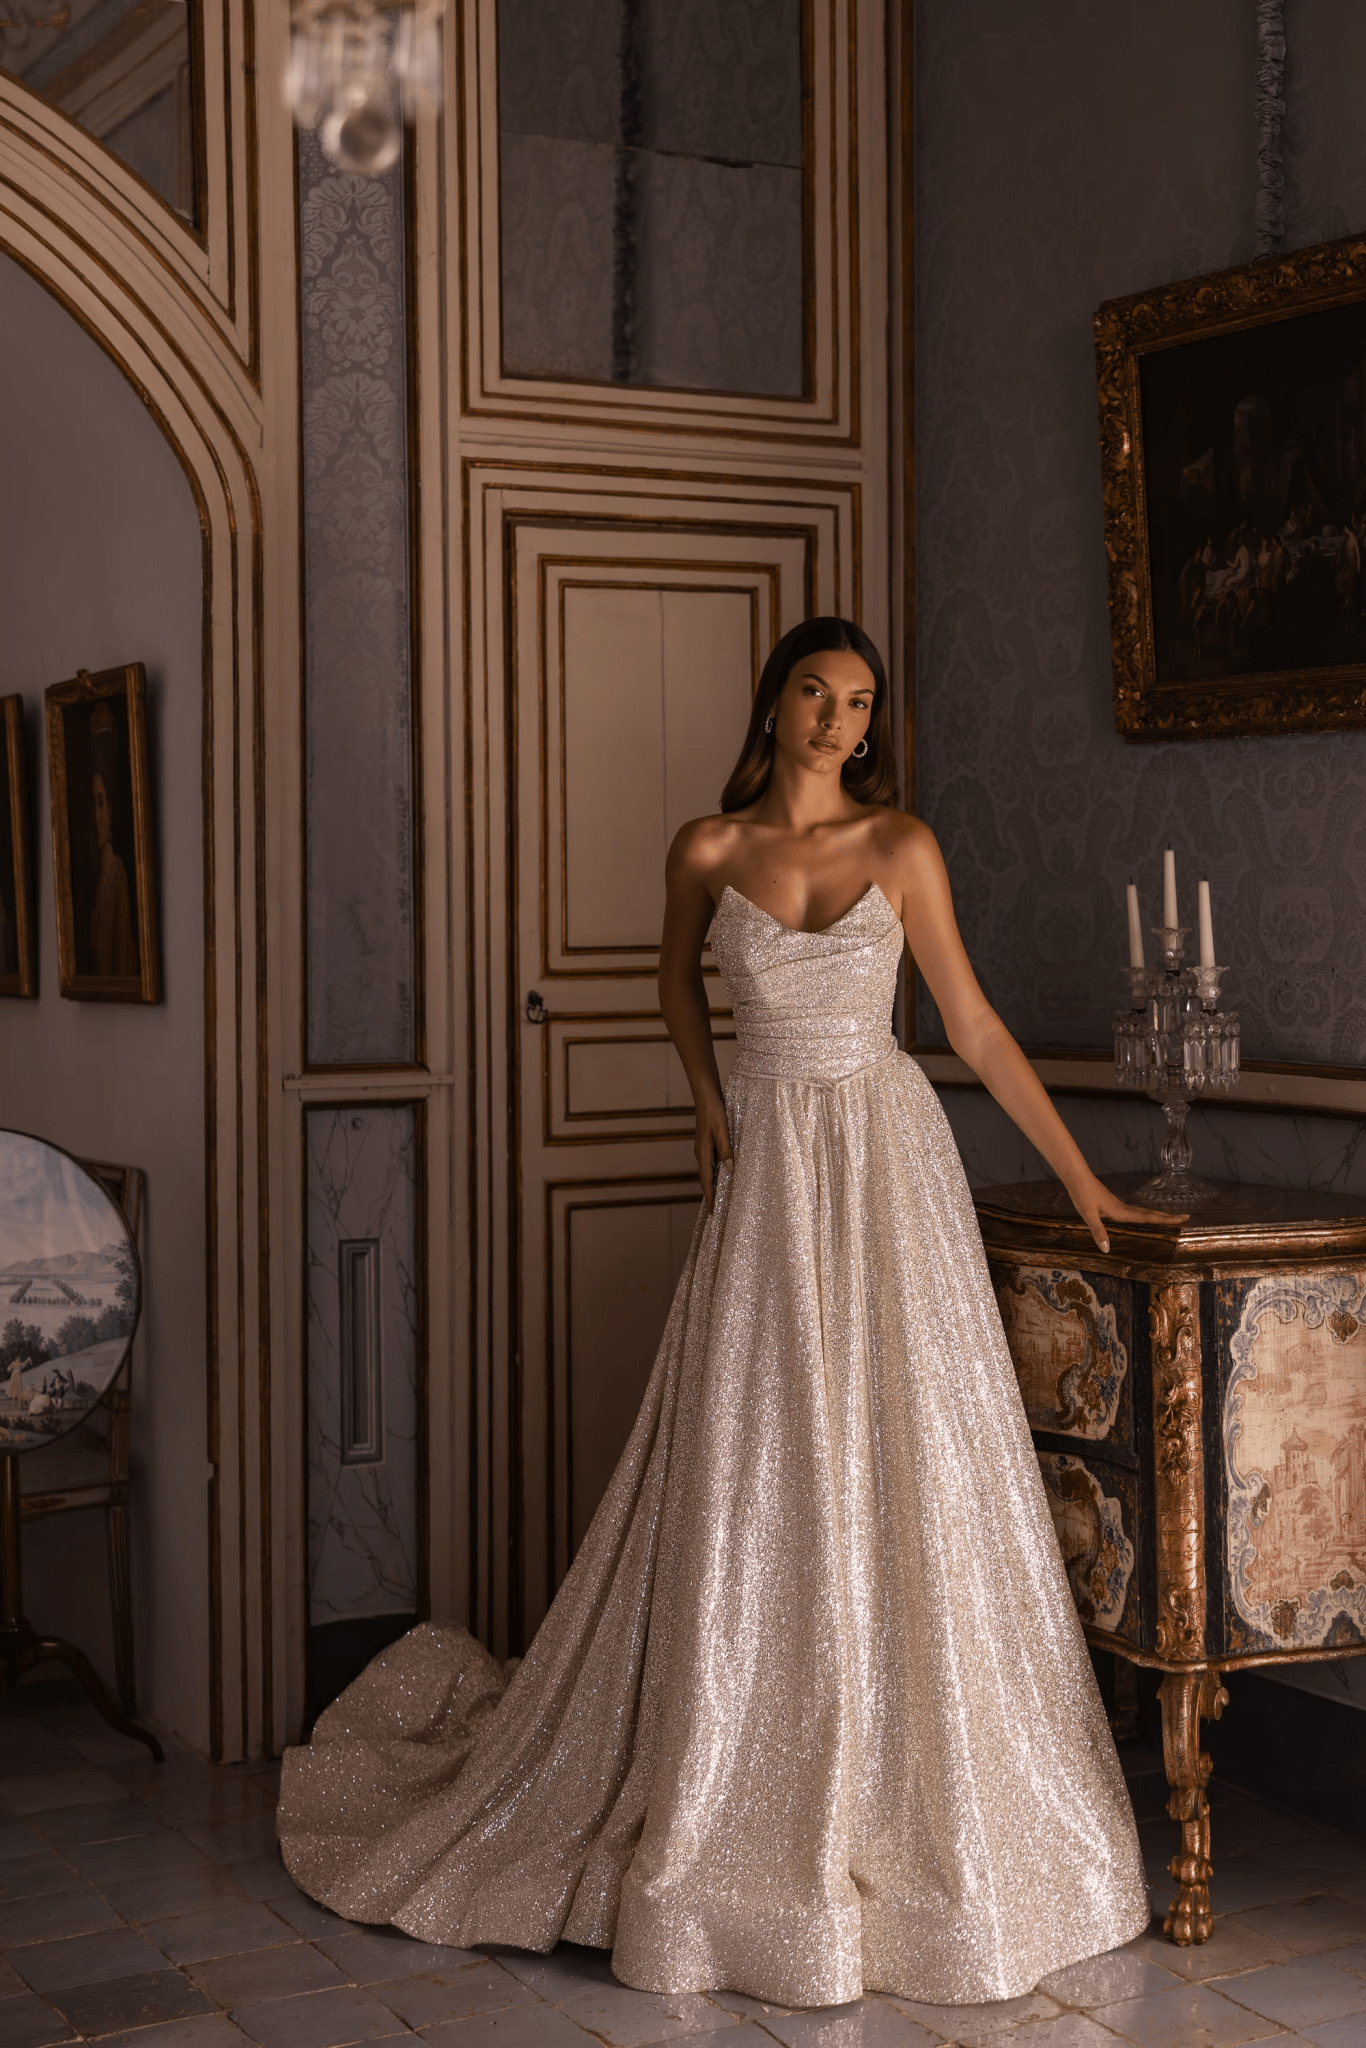 Glamorous Sequin Wedding Dress and Pretty Sequin Gown - Silver Ball Dress with Strapless Neckline Plus Size - WonderlandByLilian